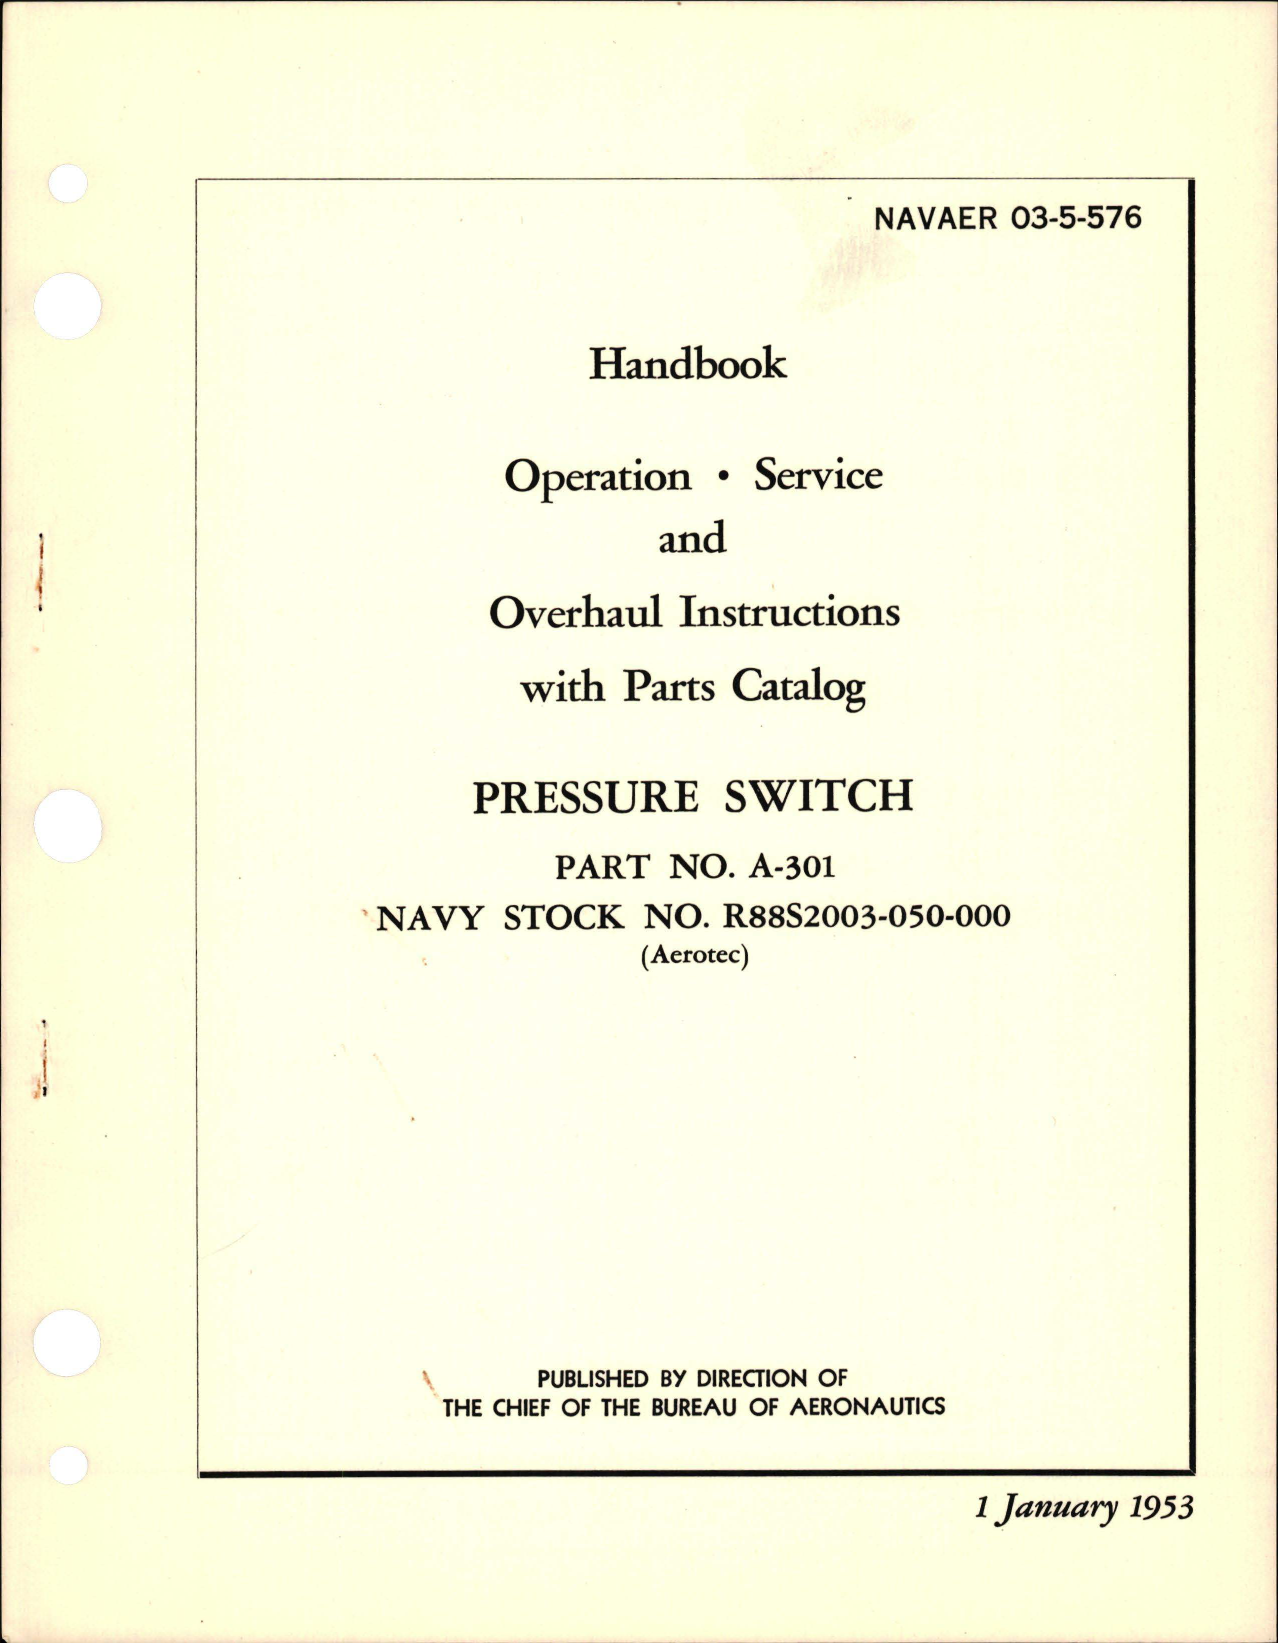 Sample page 1 from AirCorps Library document: Operation, Service and Overhaul Instructions with Parts Catalog for Pressure Switch - Part A-301 